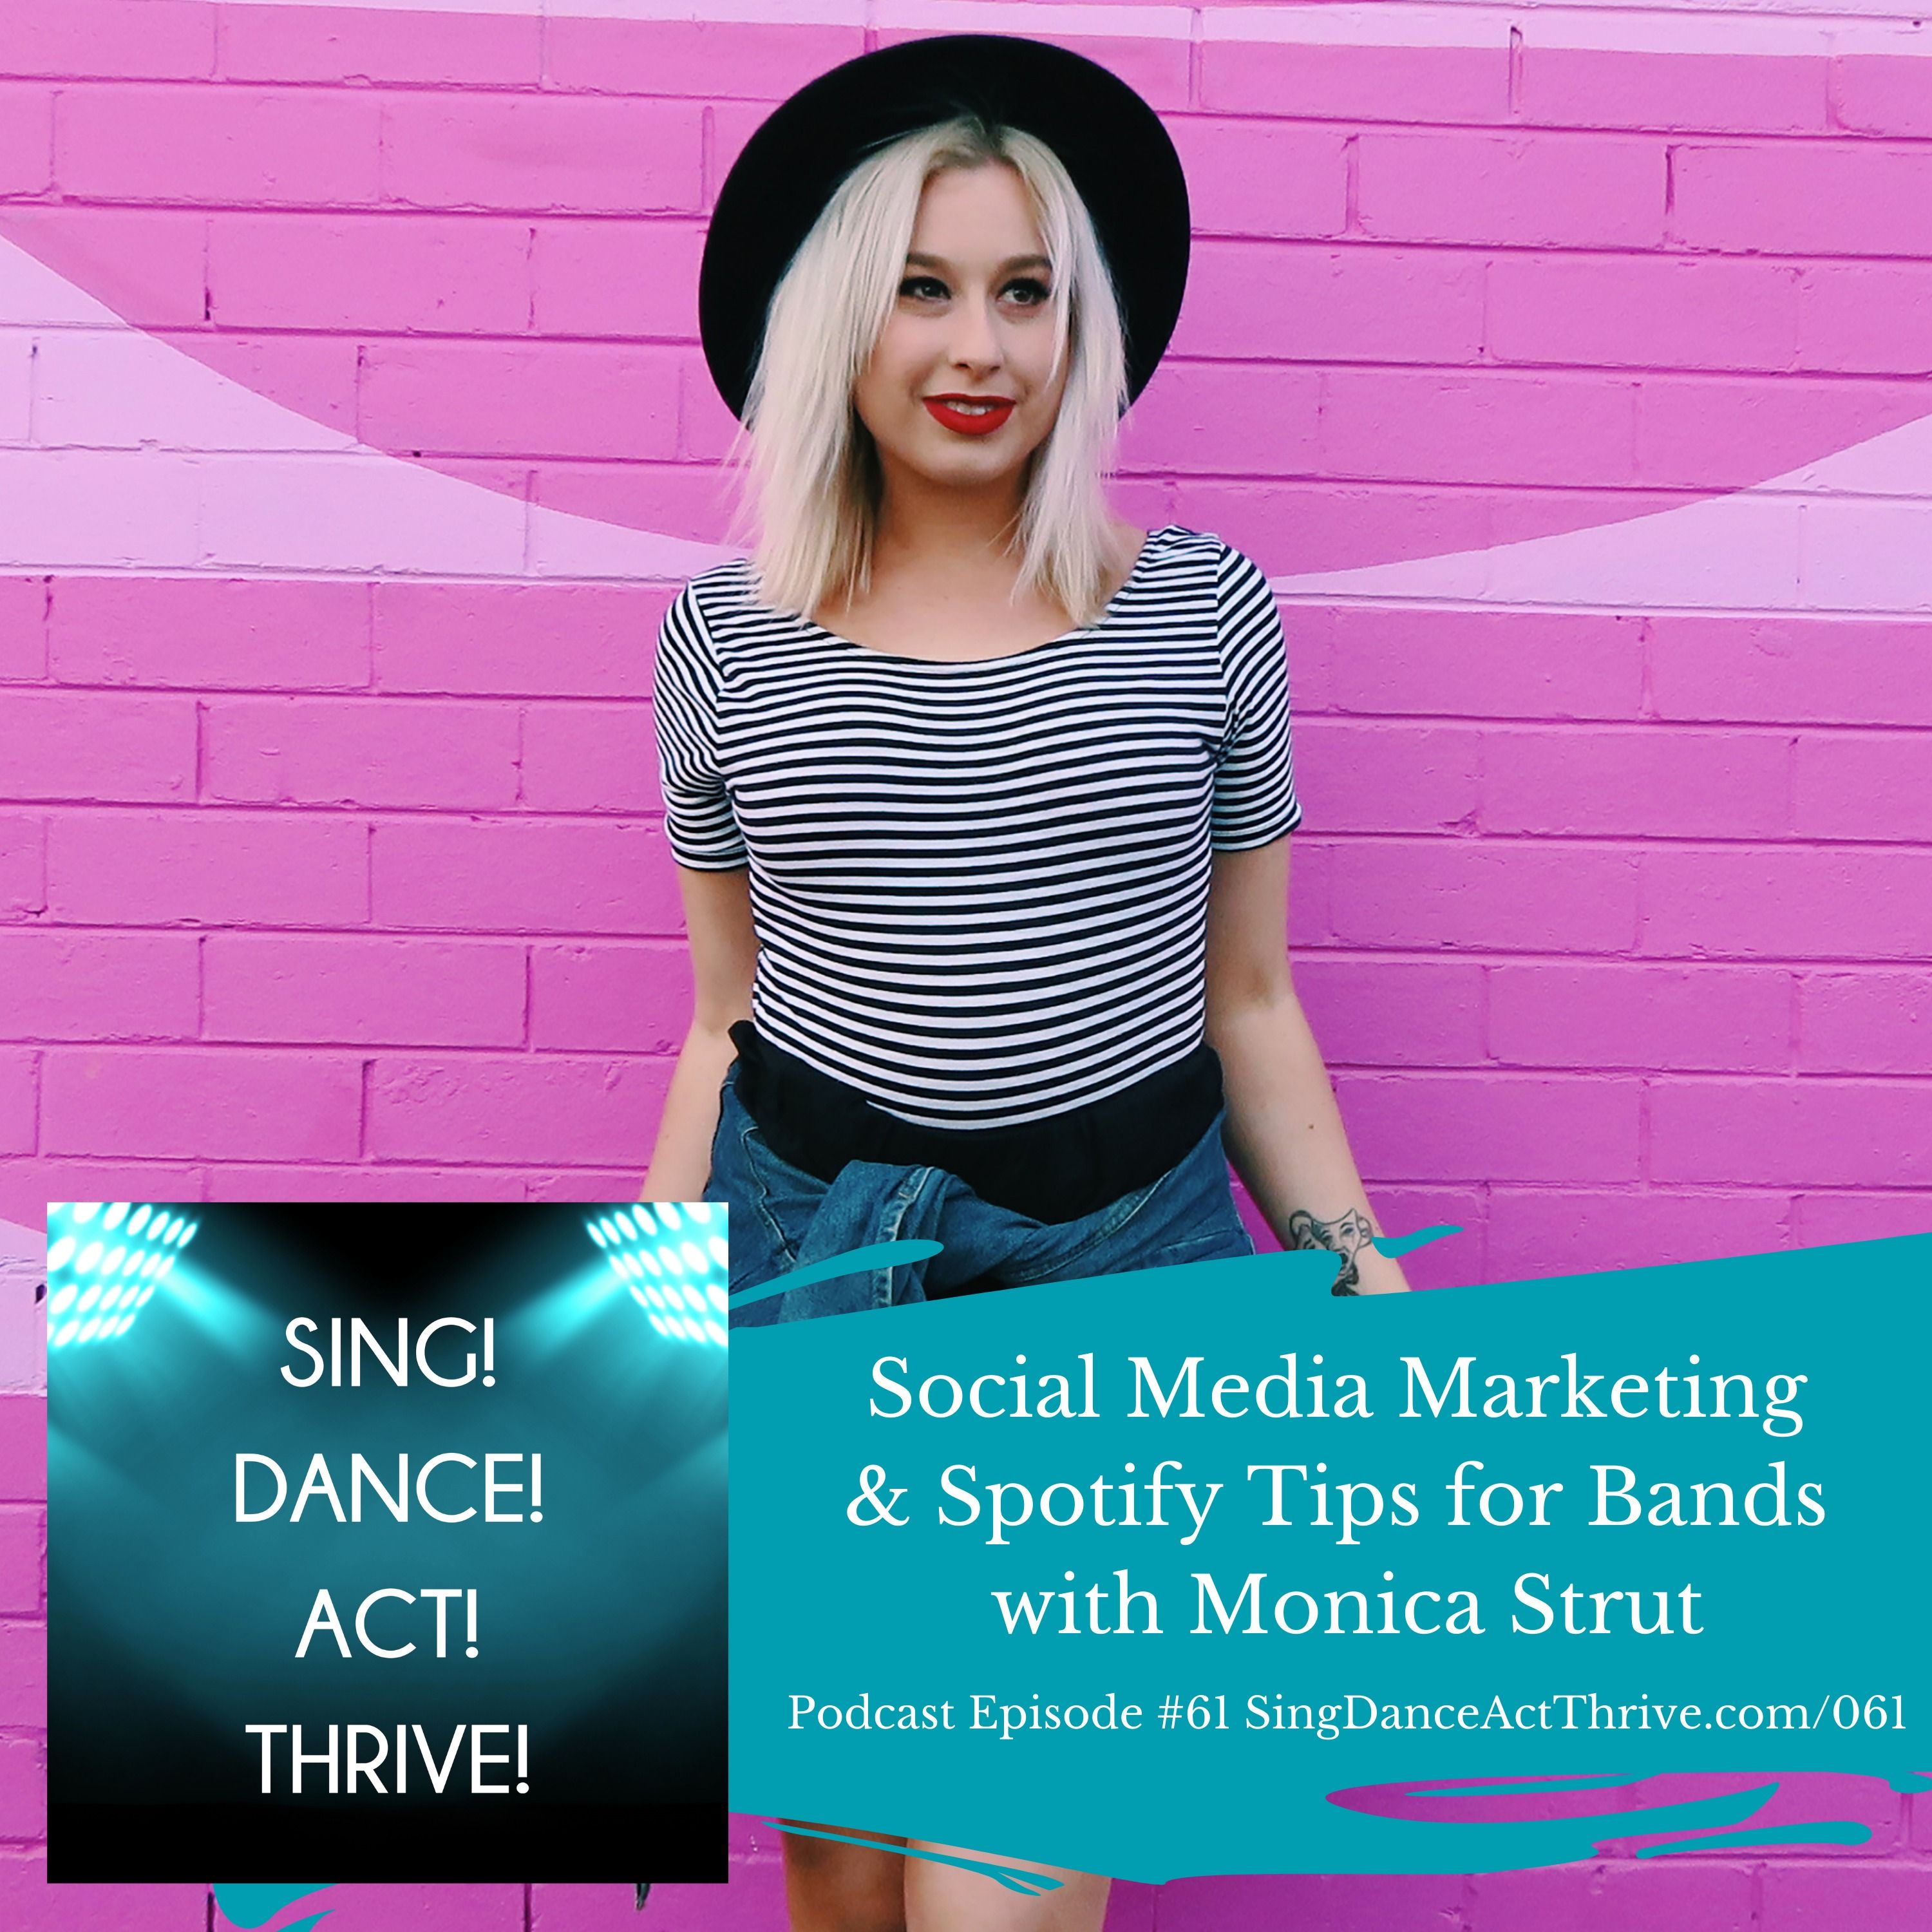 Social Media & Spotify Tips for Bands with Monica Strut